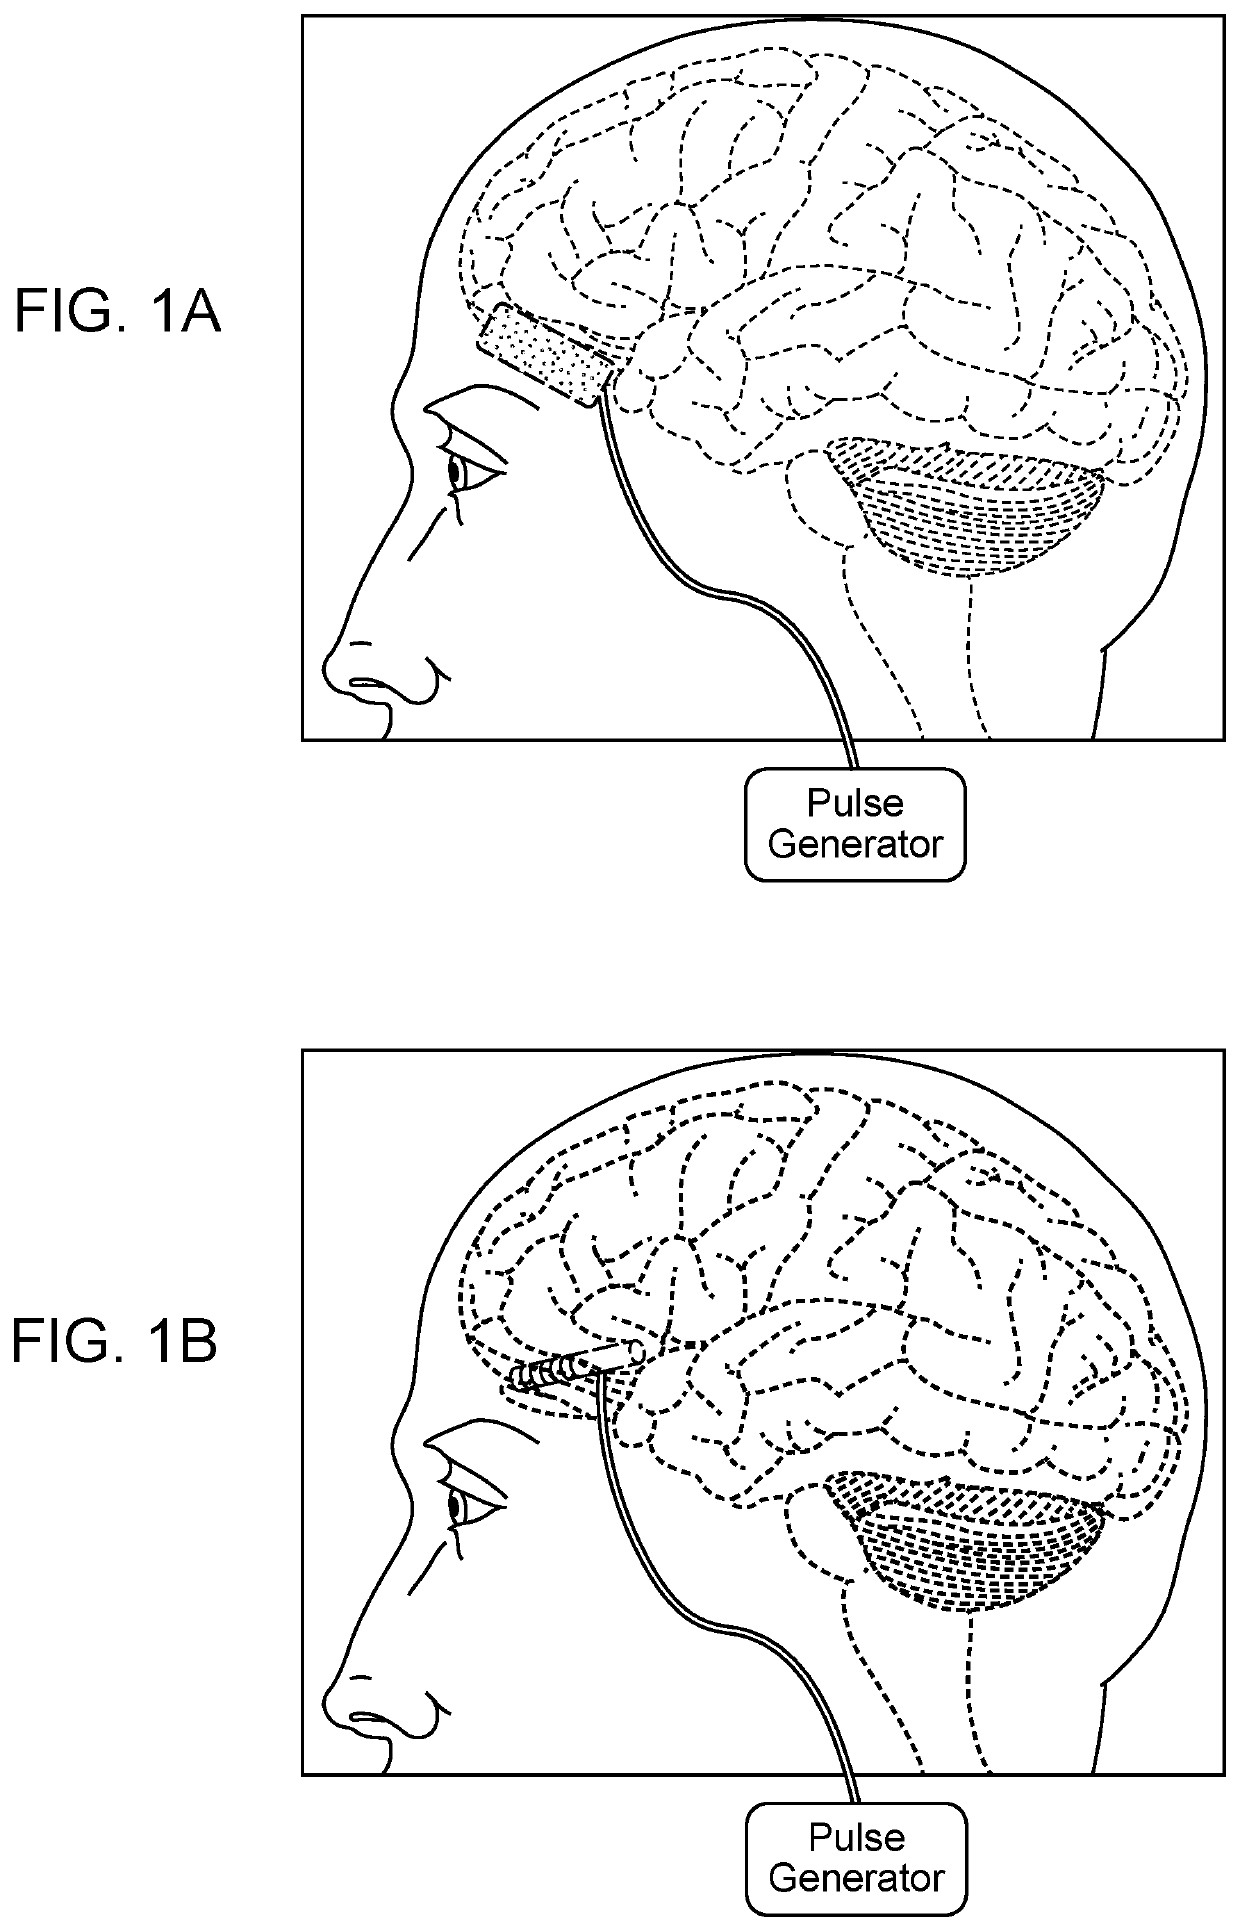 Method of neural Intervention for the Treatment of Affective Neuropsychiatric Disorders